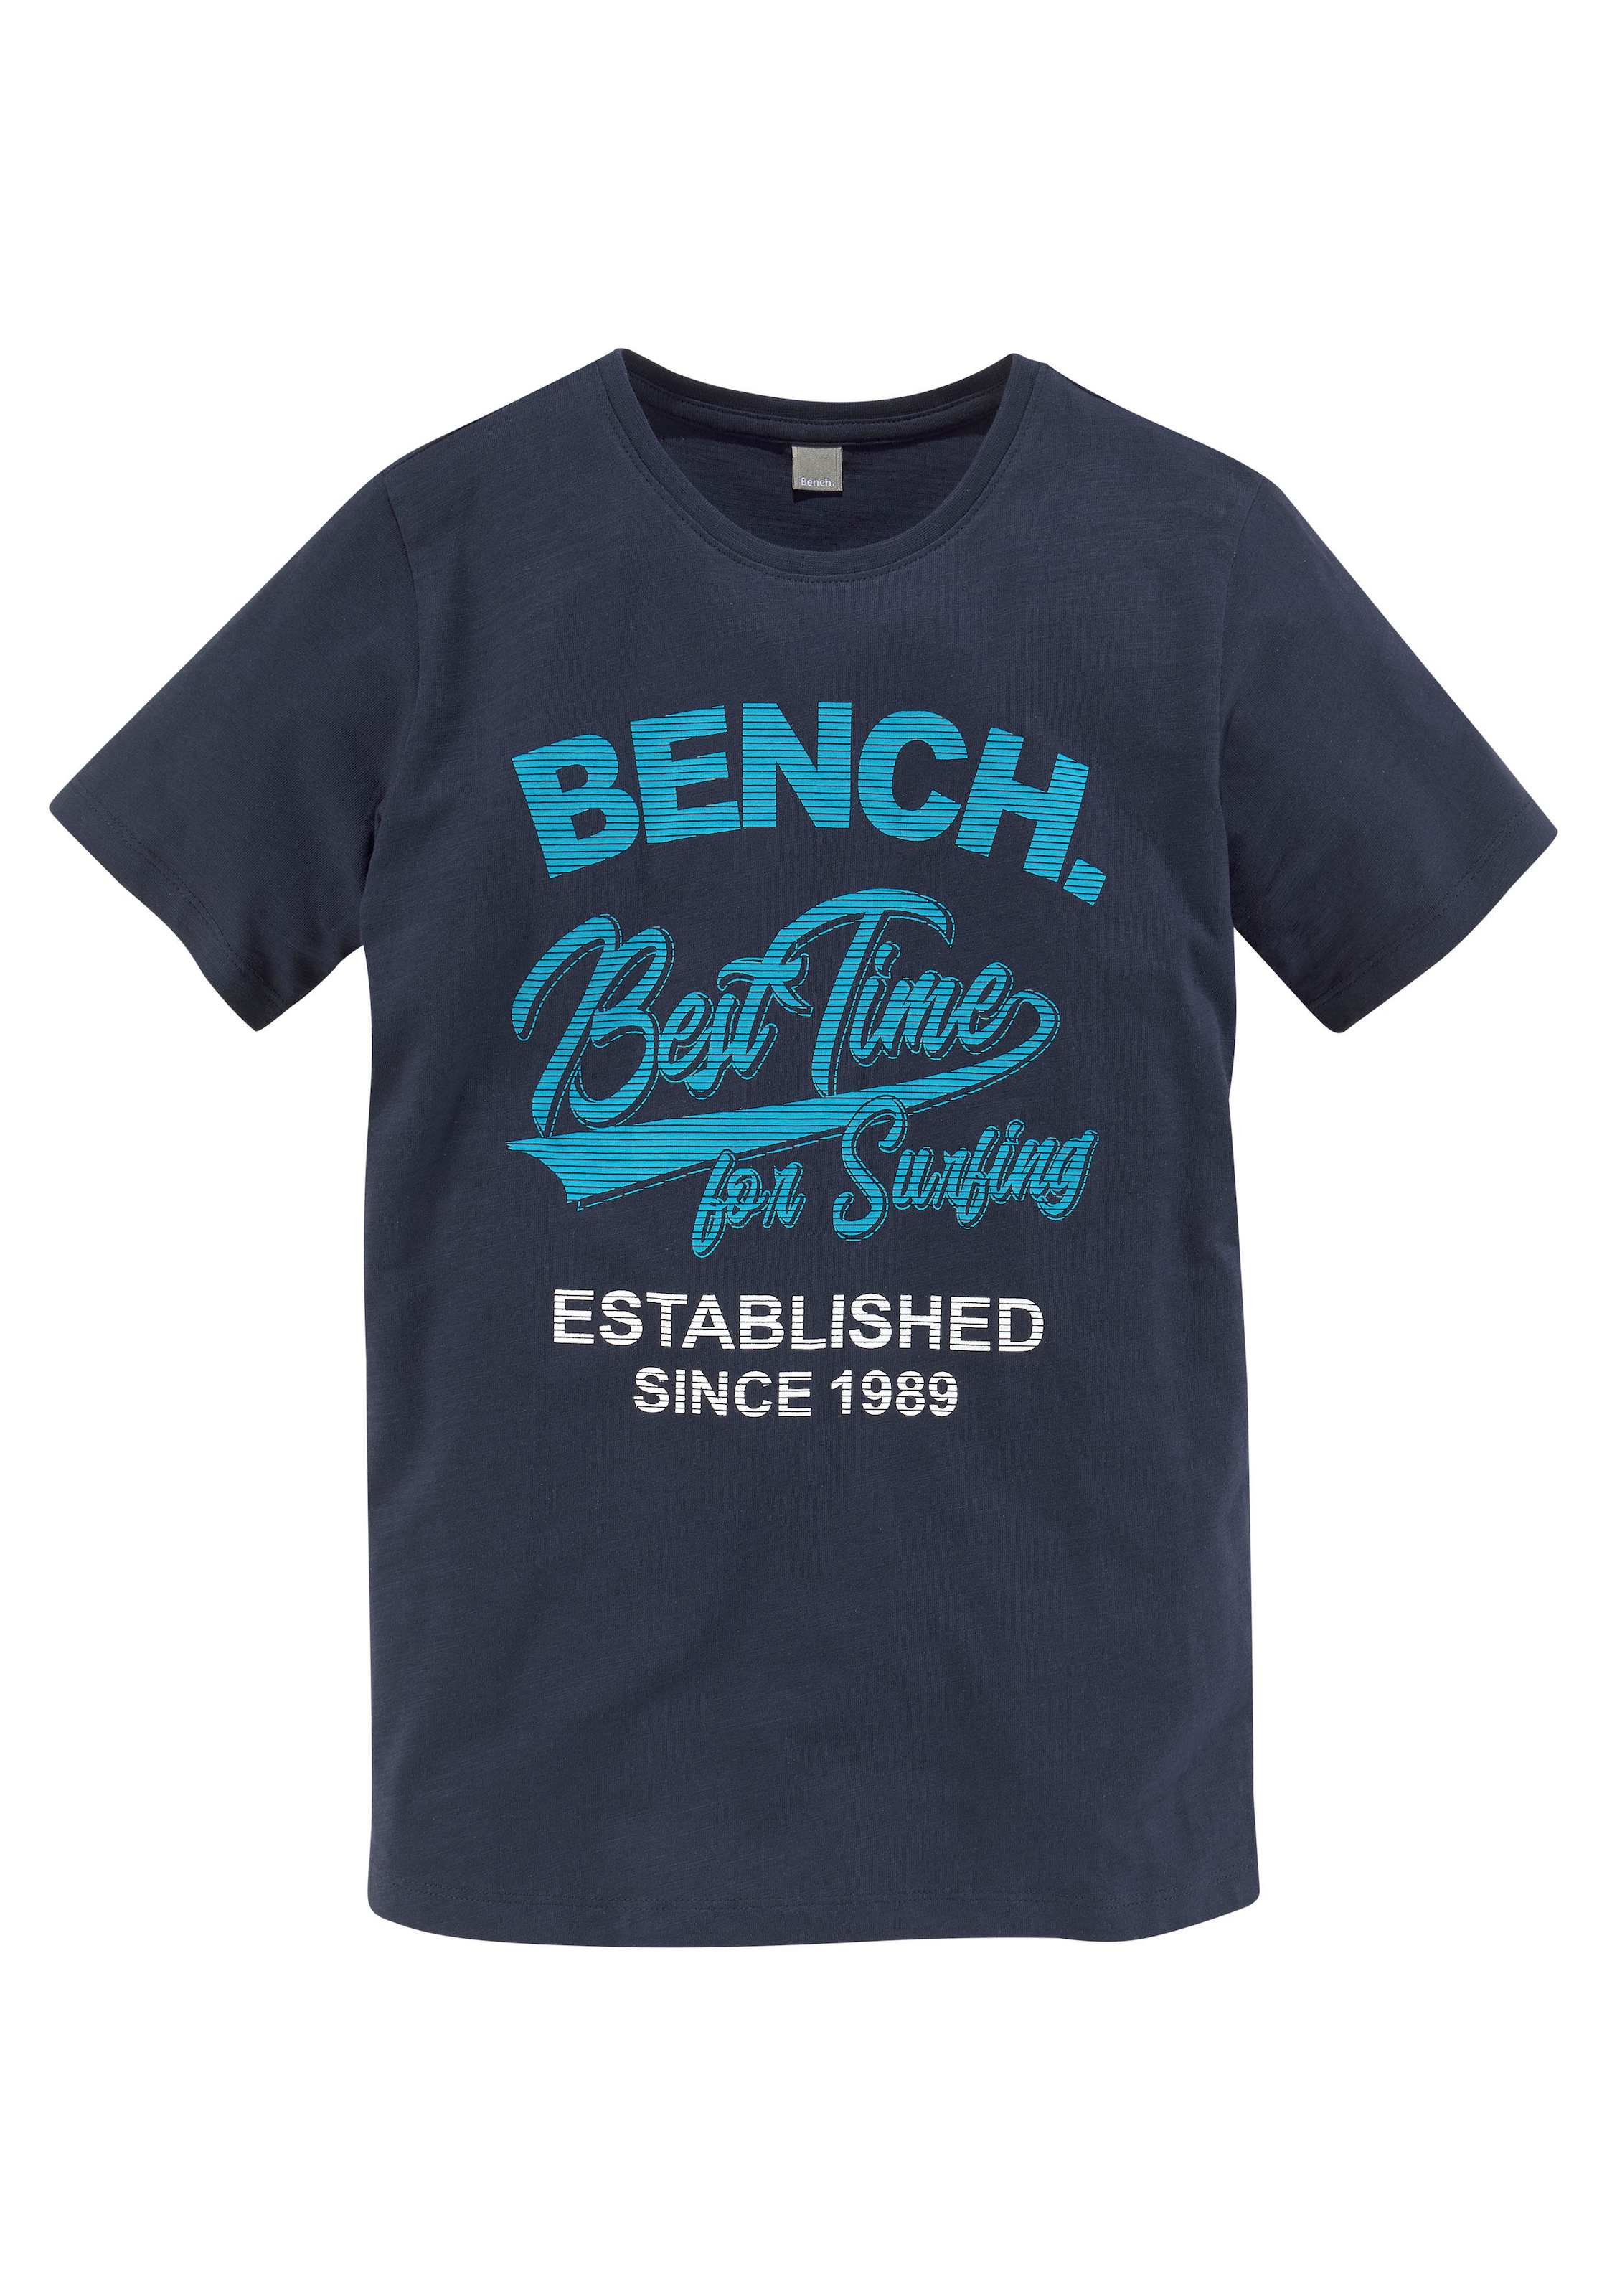 »Best for Bench. time T-Shirt OTTO surfing« bei